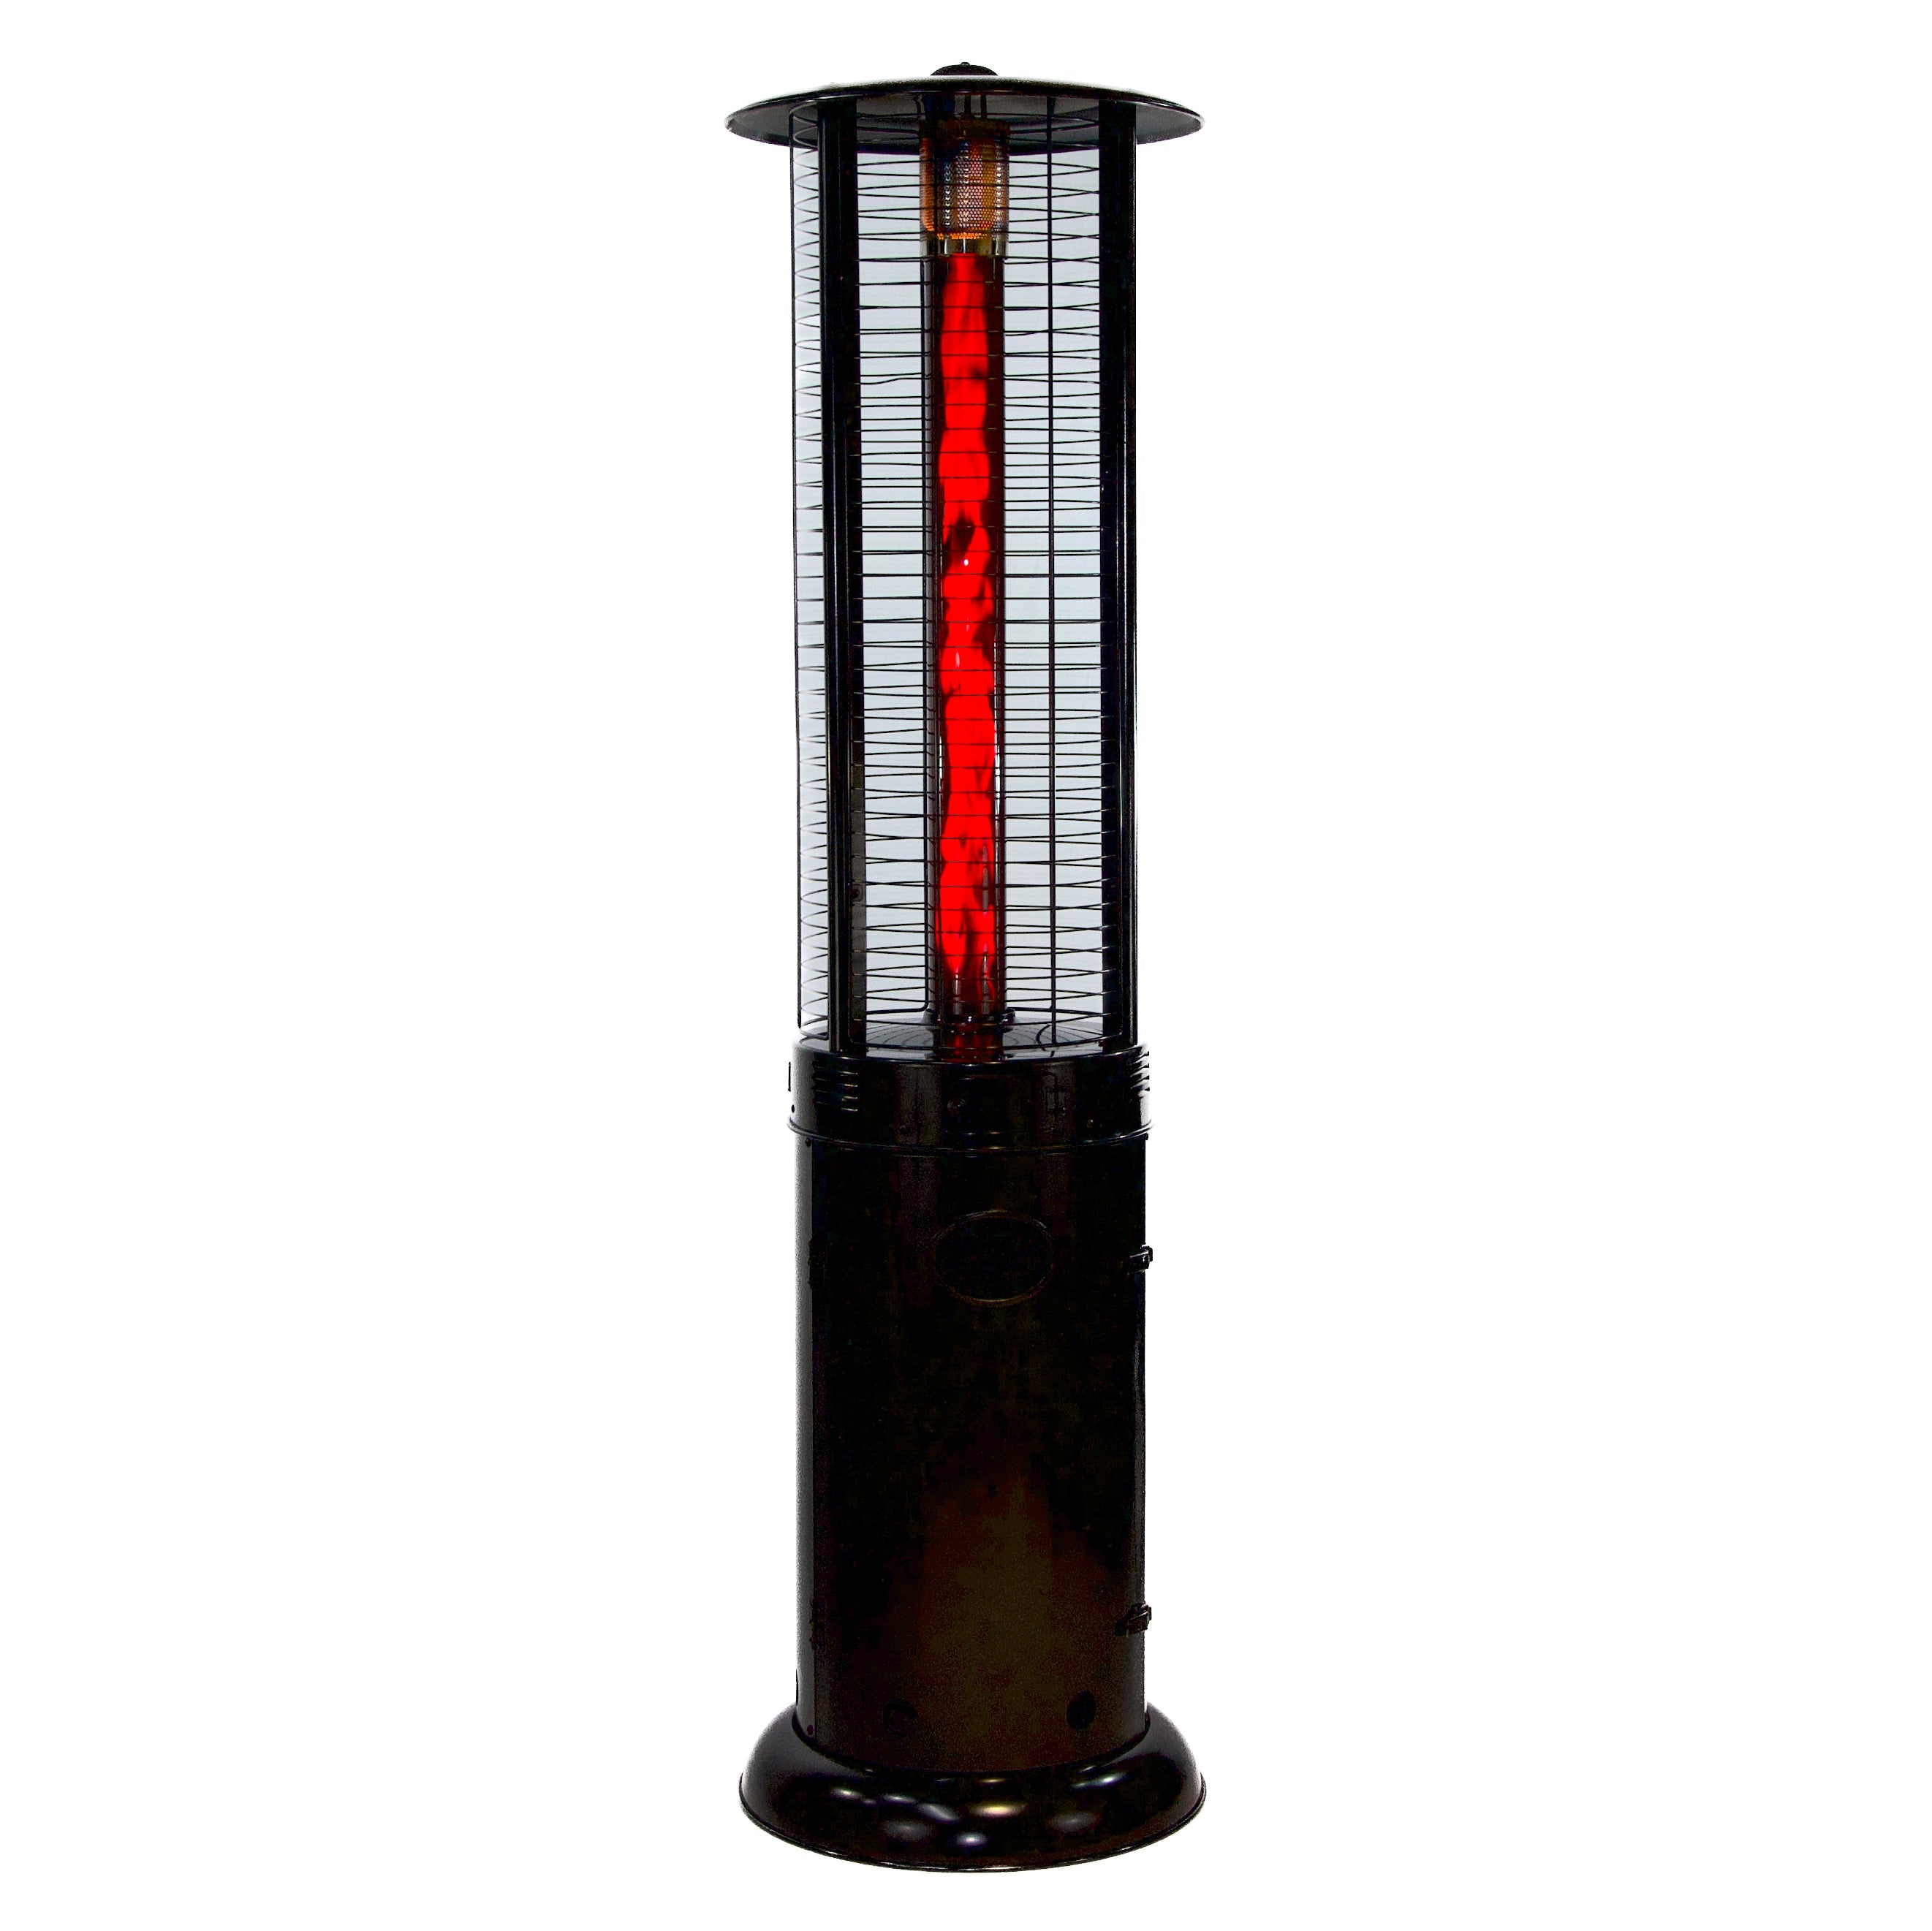 RADtec 80 Ellipse Flame Propane Patio Heater - Black with Ruby Glass 41,000 BTU  - 80-ELL-FLM-HT - Back View With Glow Fire